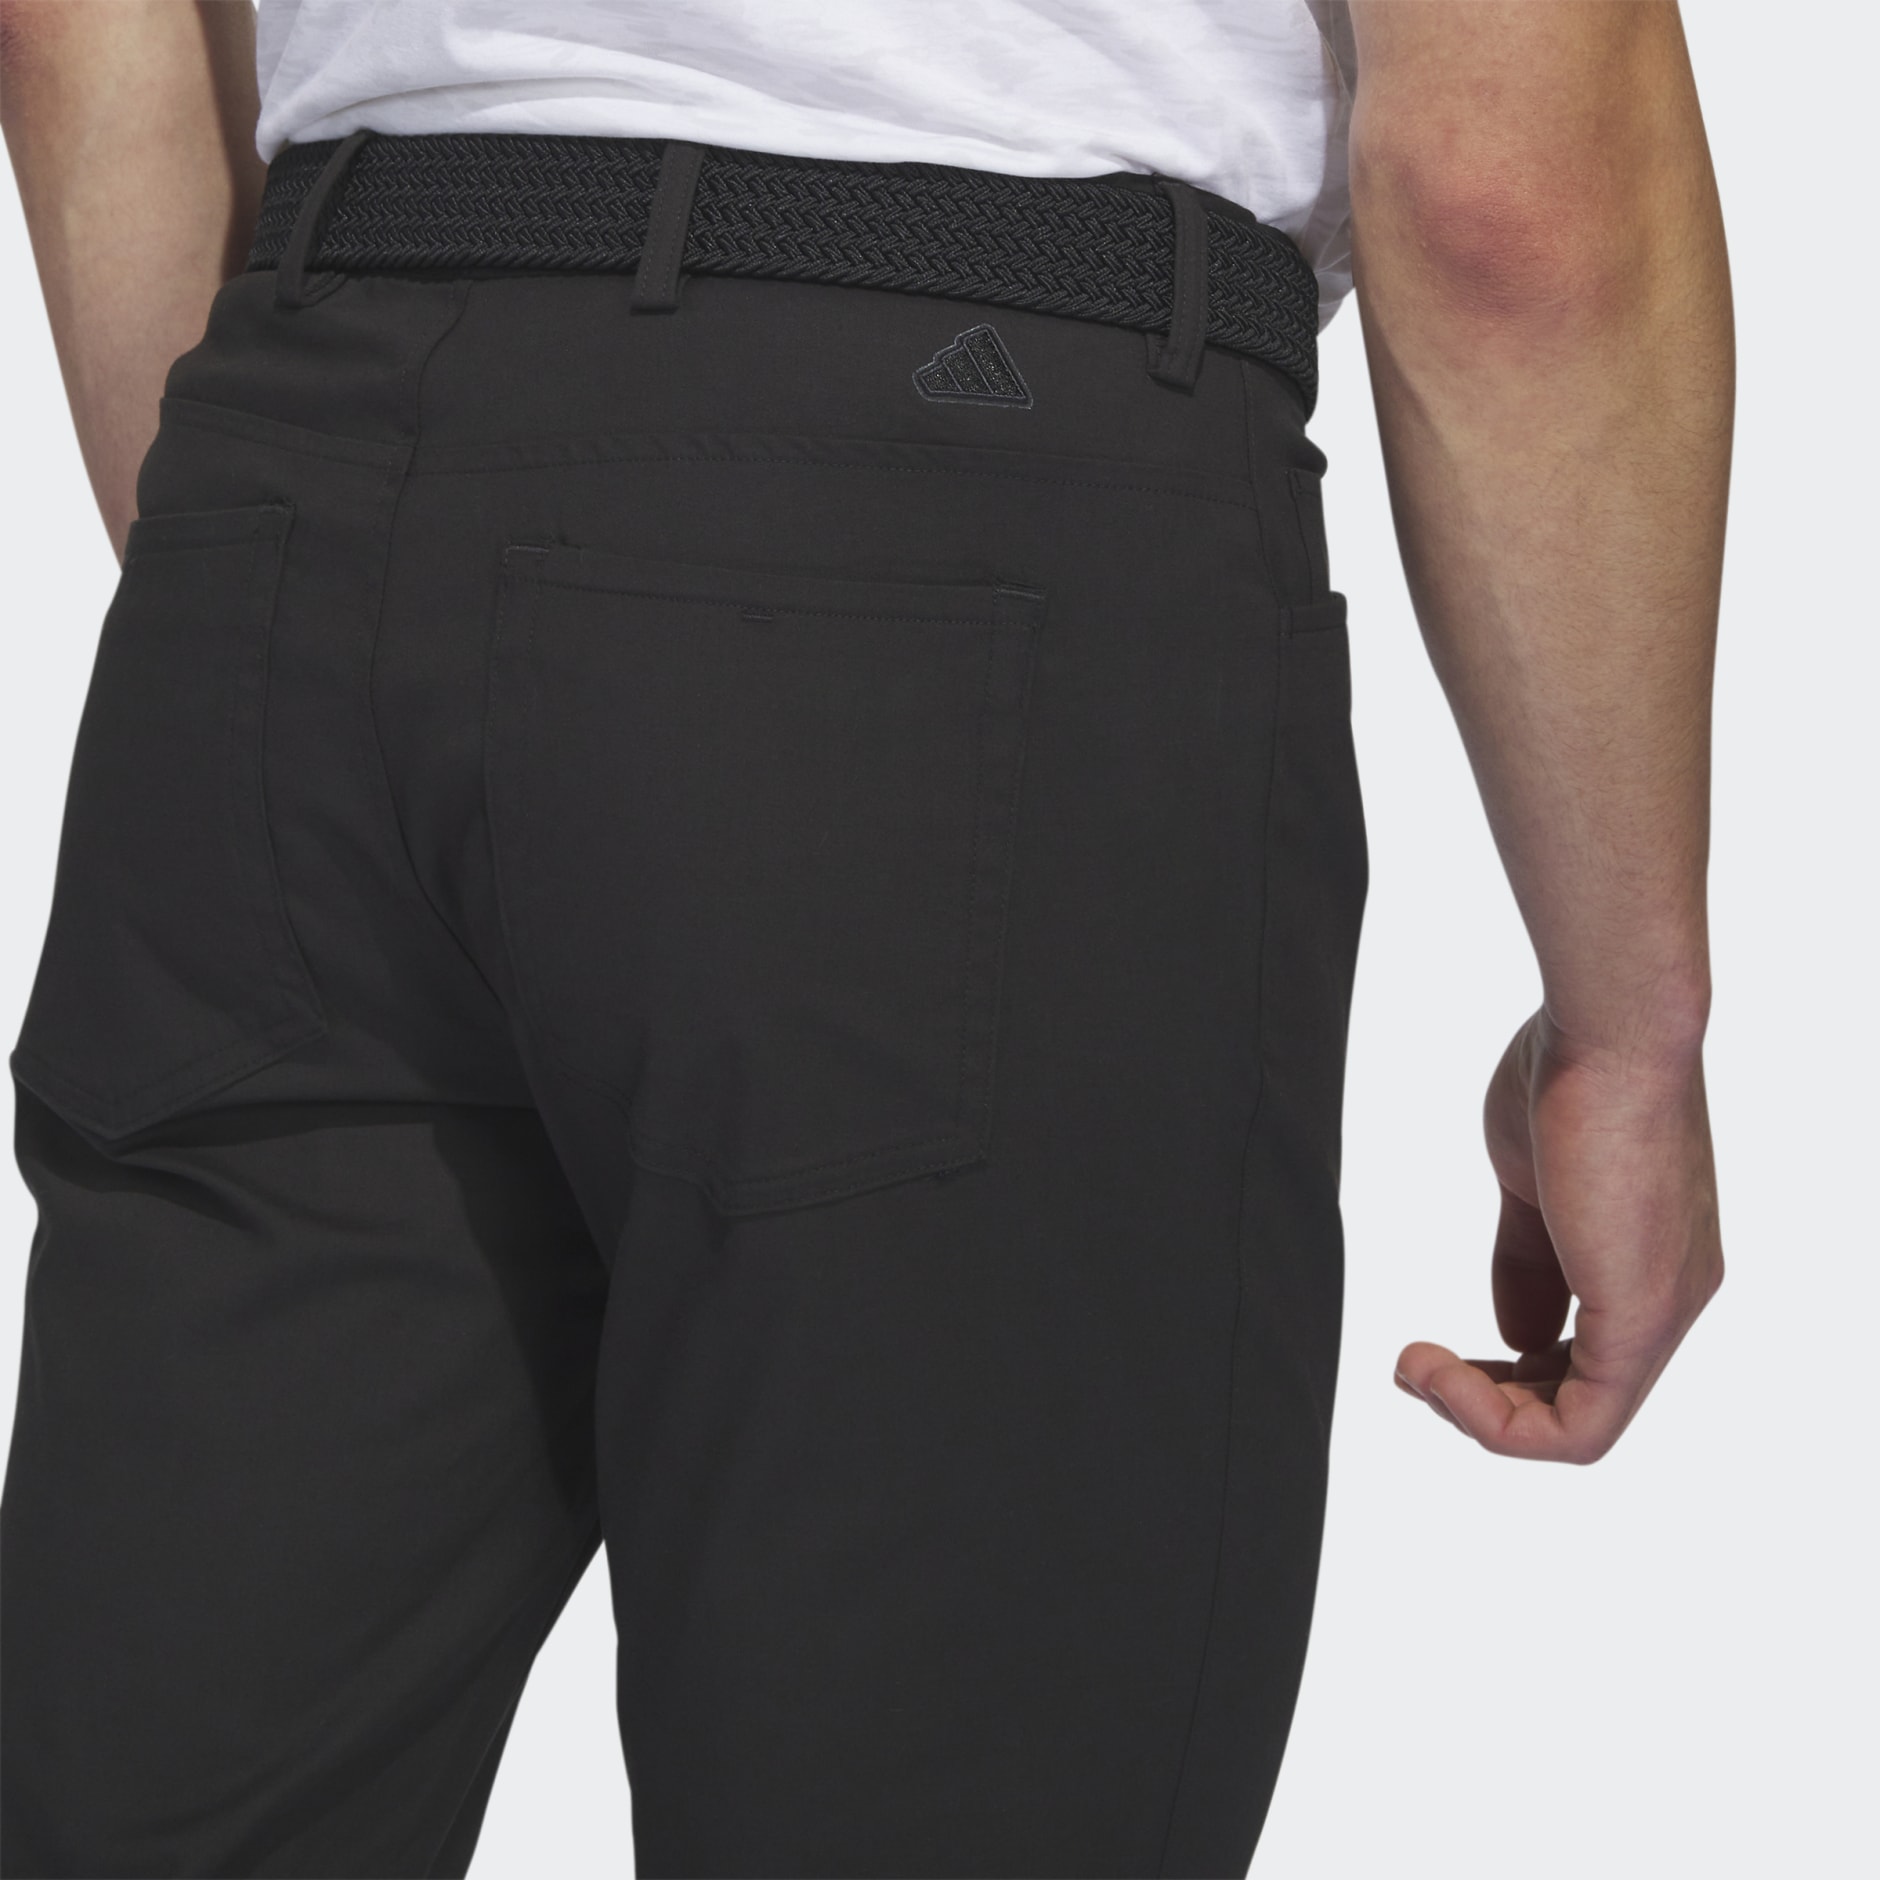 Clothing - Go-To 5-Pocket Golf Pants - Black | adidas South Africa